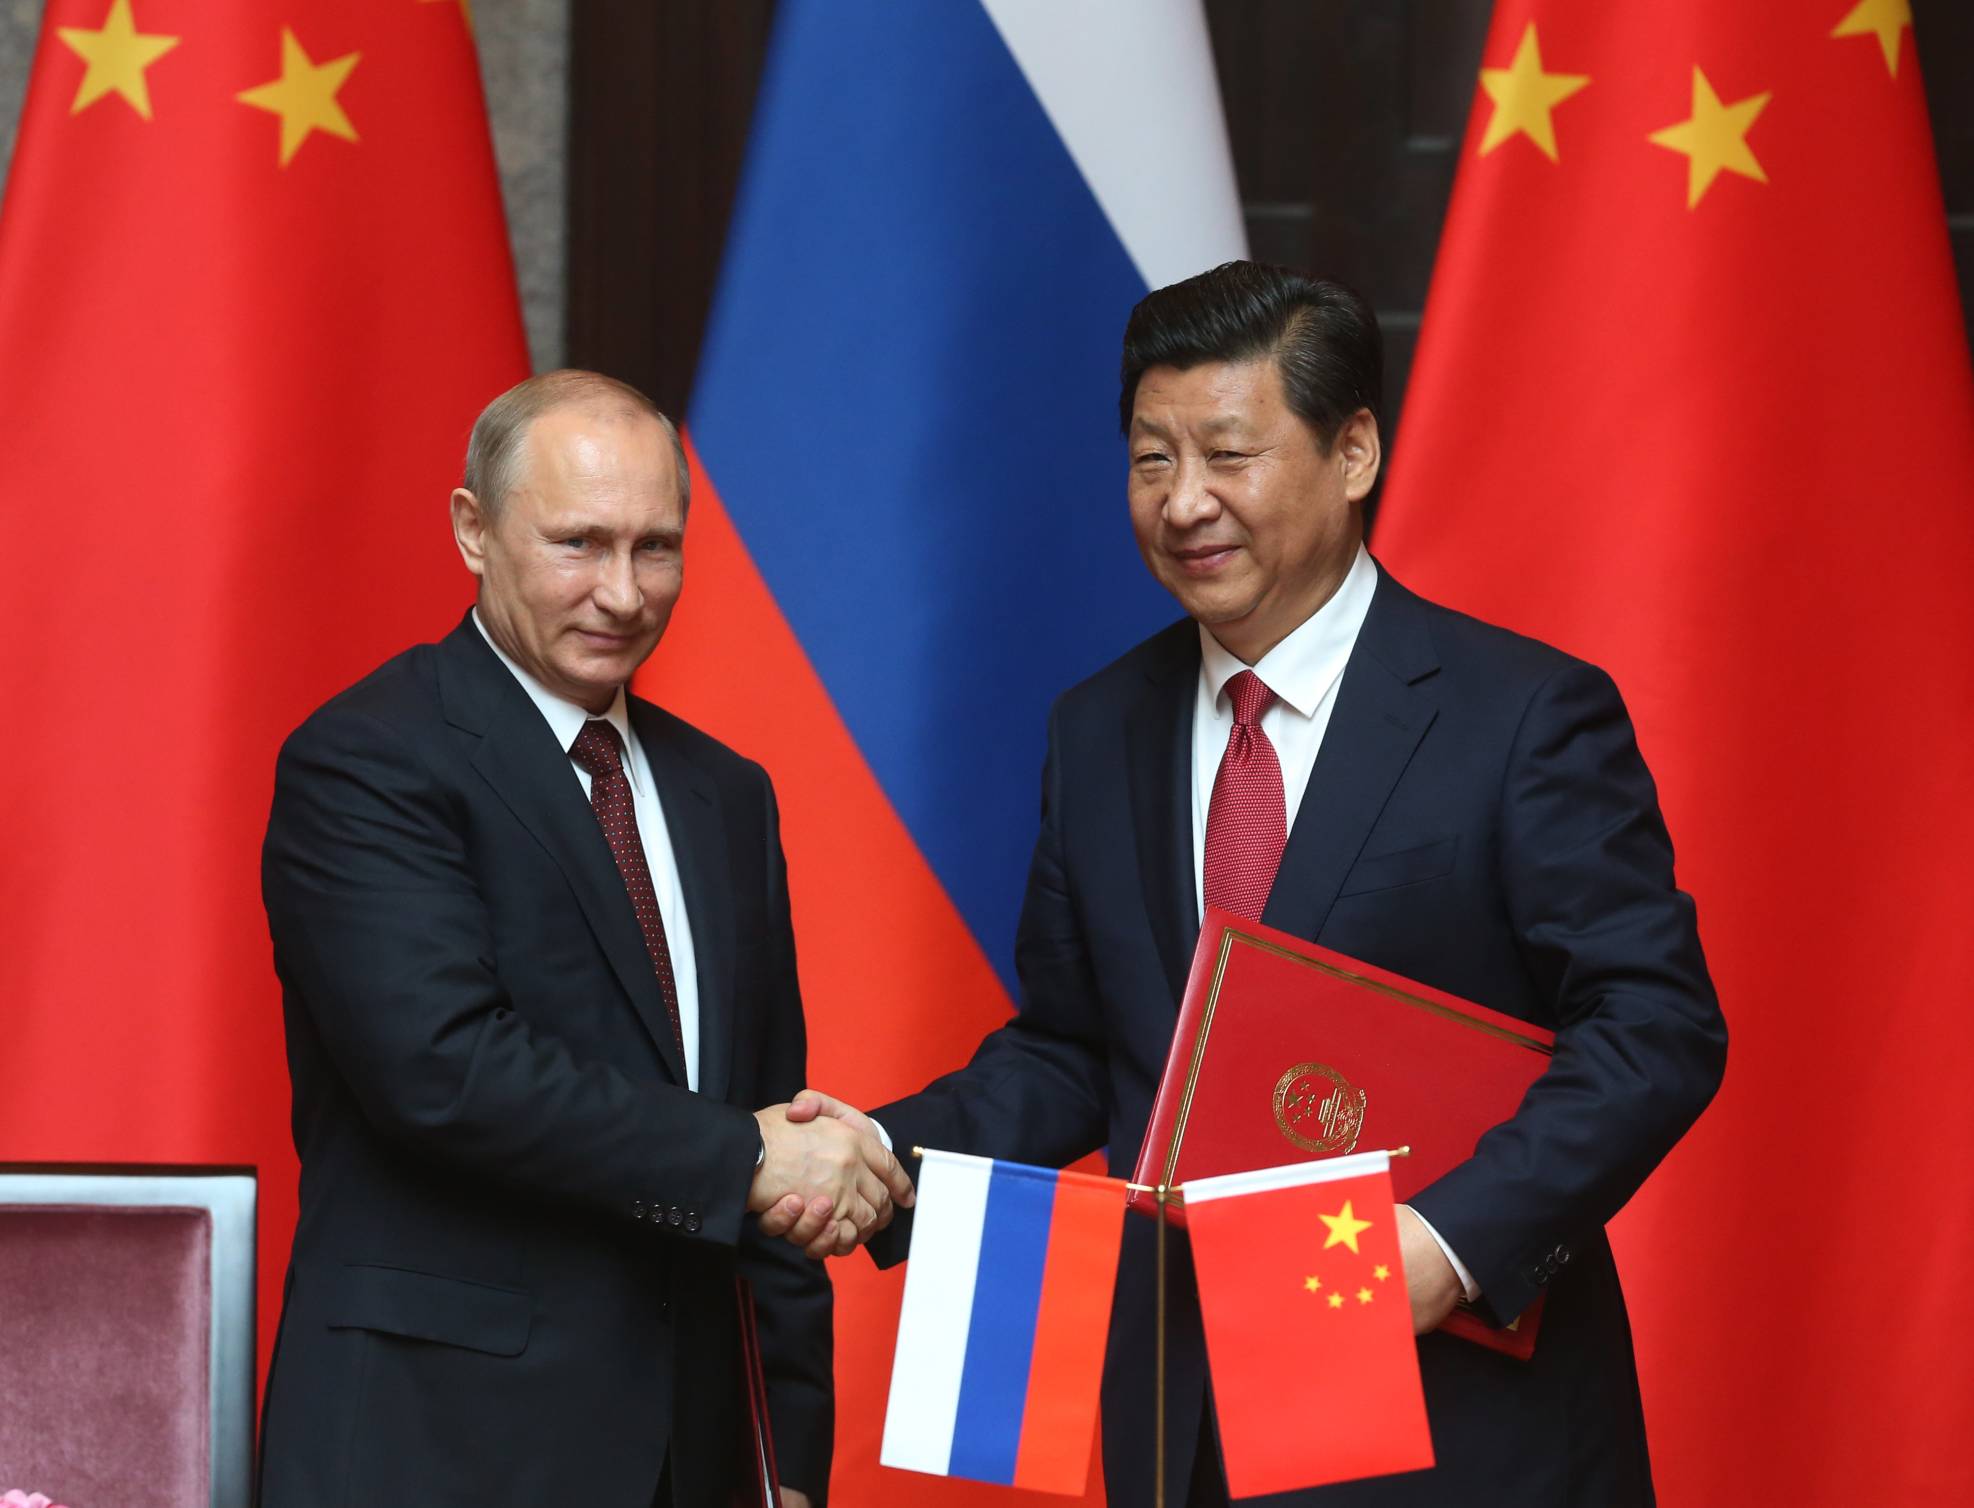 Russian President Vladimir Putin and Chinese President Xi Jingping attend a welcoming ceremony on May 20, 2014 in Shanghai